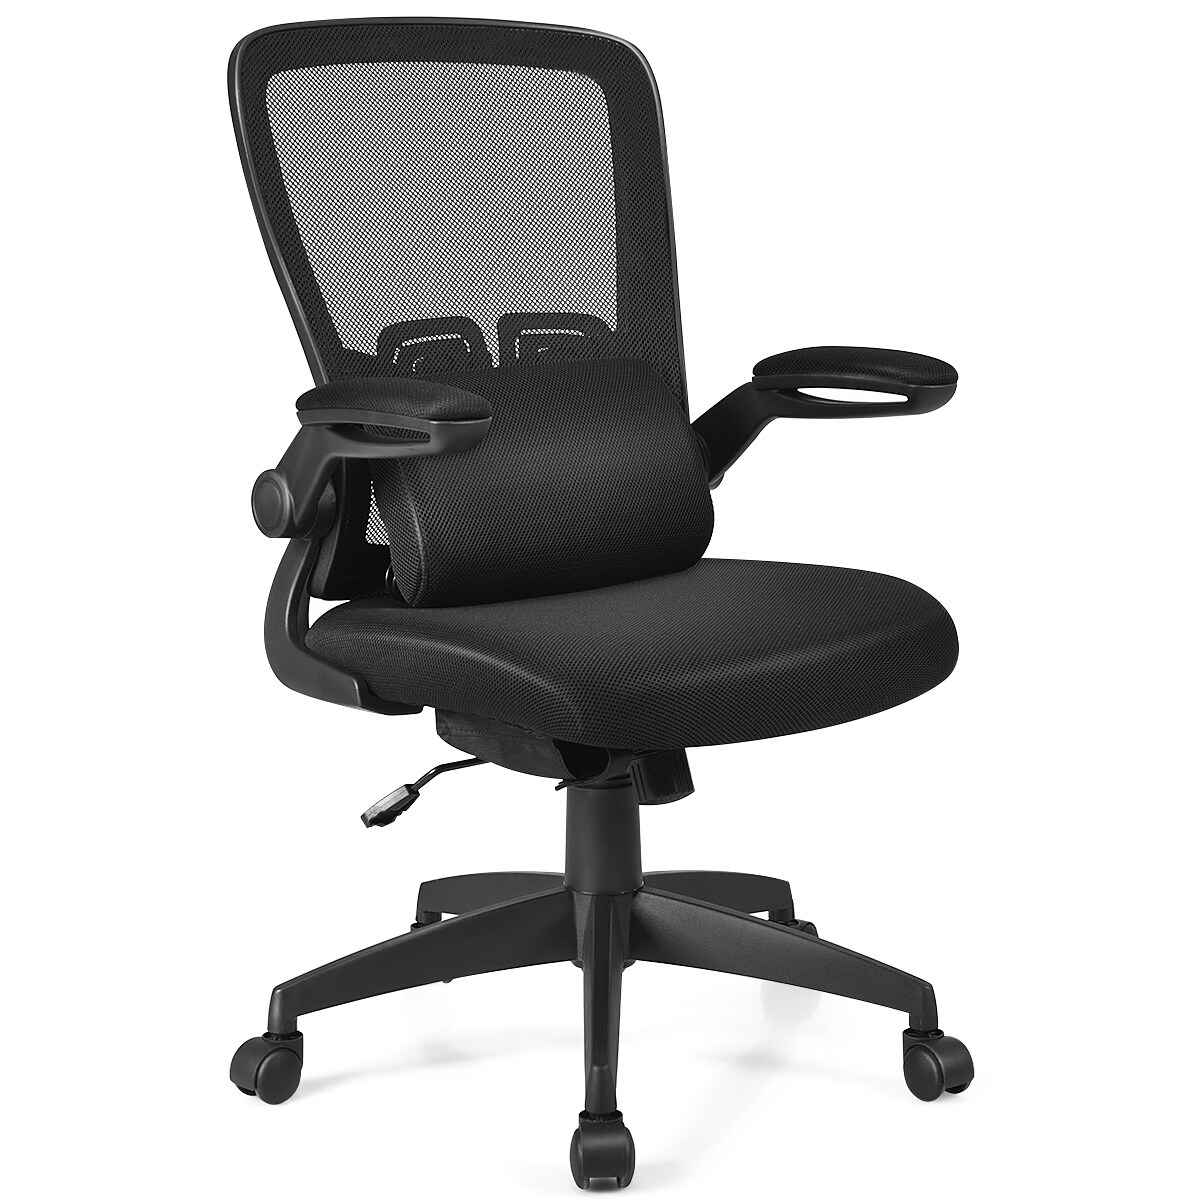 https://ak1.ostkcdn.com/images/products/is/images/direct/0beeff9ef62aa1e750d6aac58aacd60c96ec5cb6/Costway-Mesh-Office-Chair-Adjustable-Height%26Lumbar-Support-Flip-up.jpg